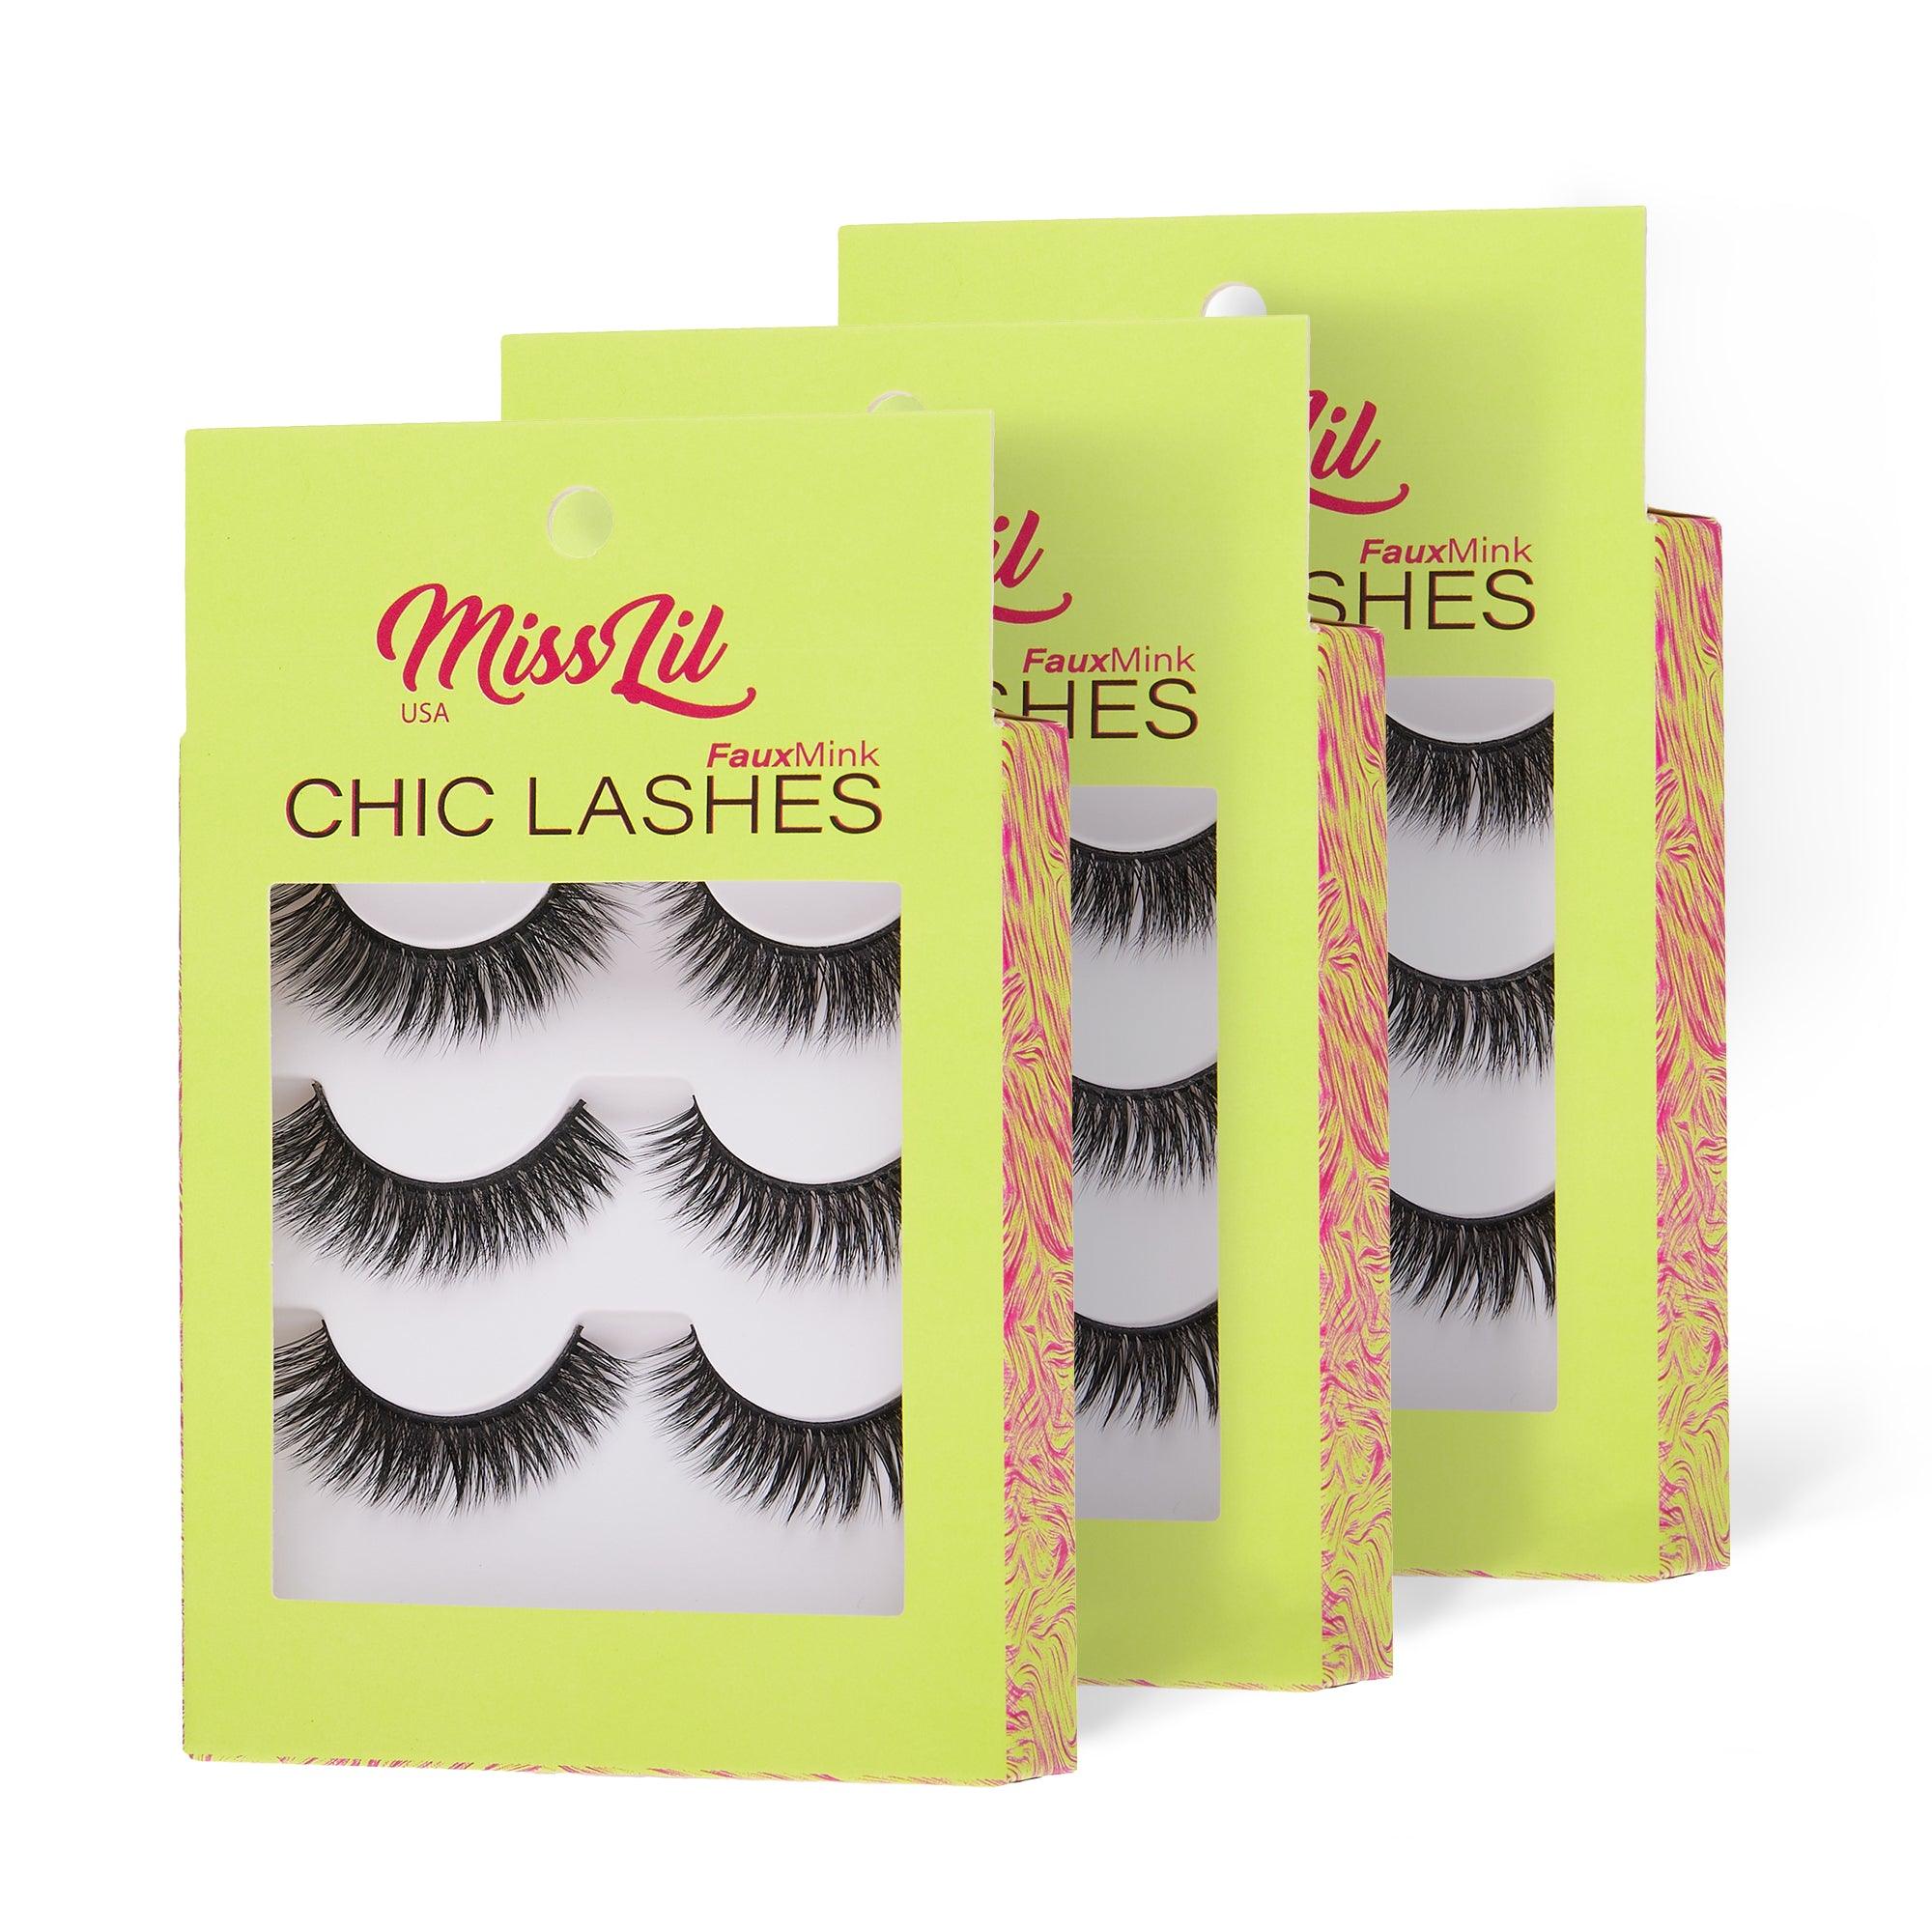 3-Pair Faux Mink Eyelashes - Chic Lashes Collection #10 - Pack of 3 - Miss Lil USA